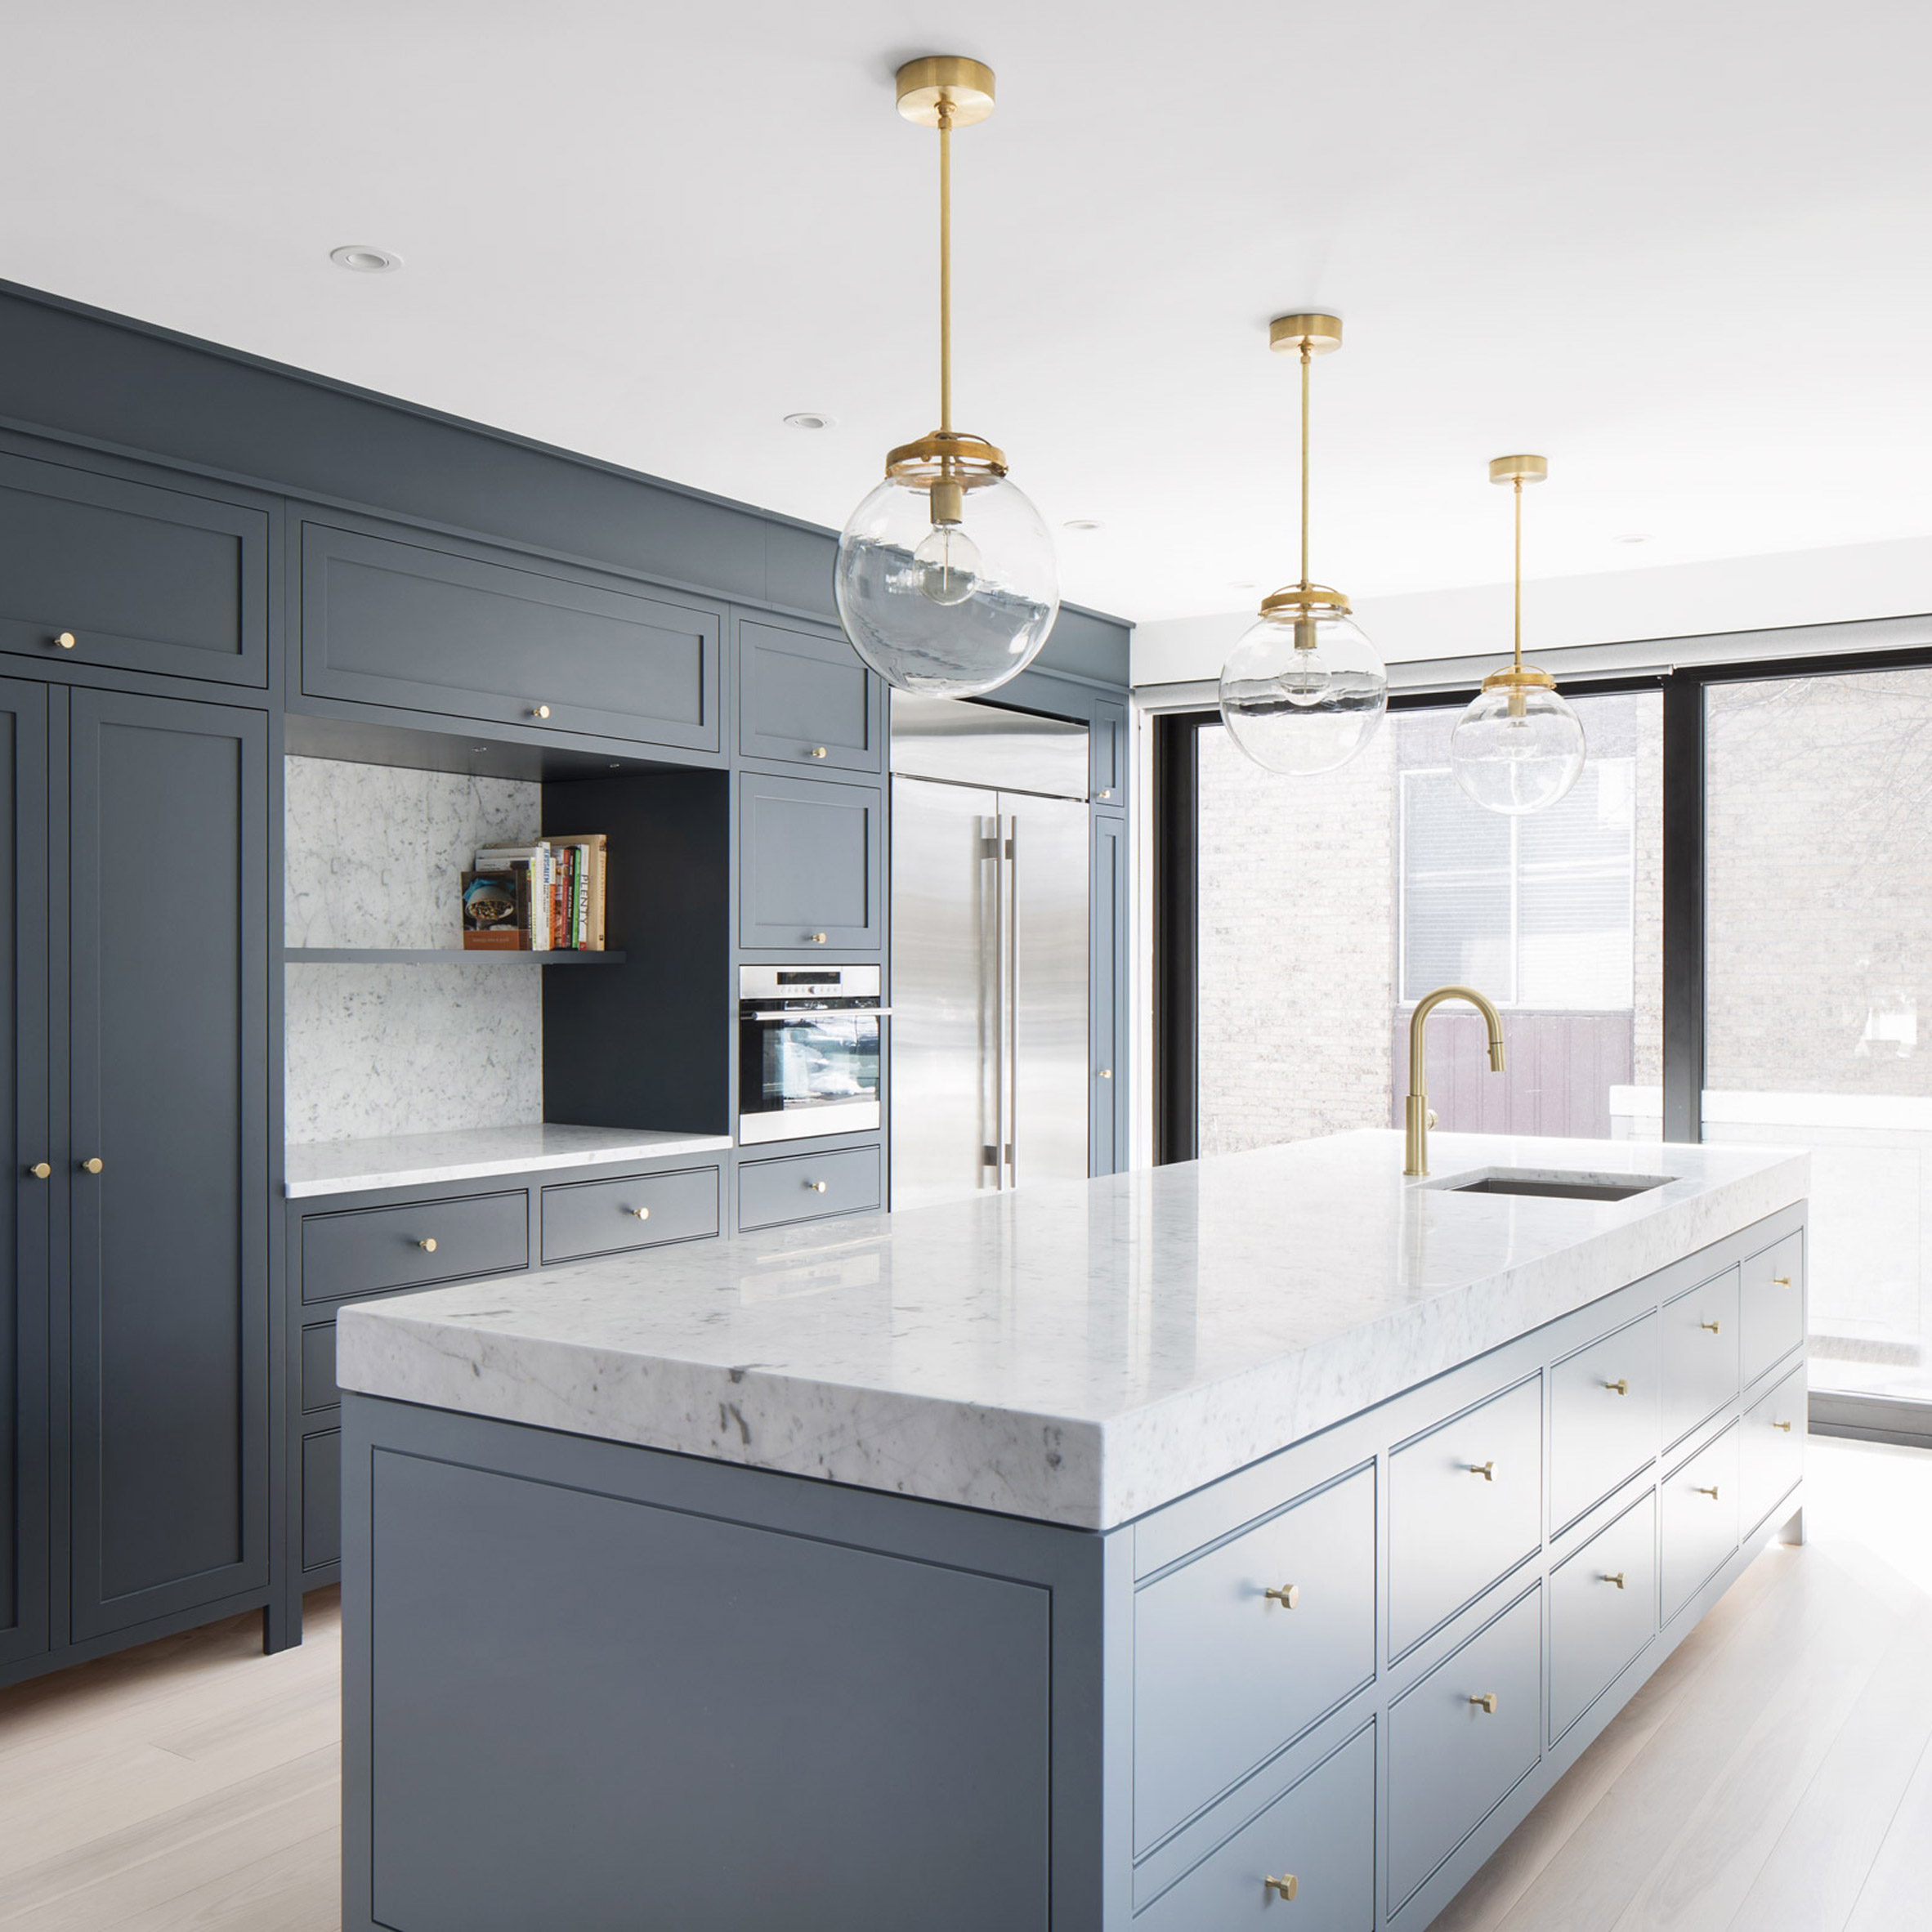 Navy and brass is 2018 interior design trend for kitchens and